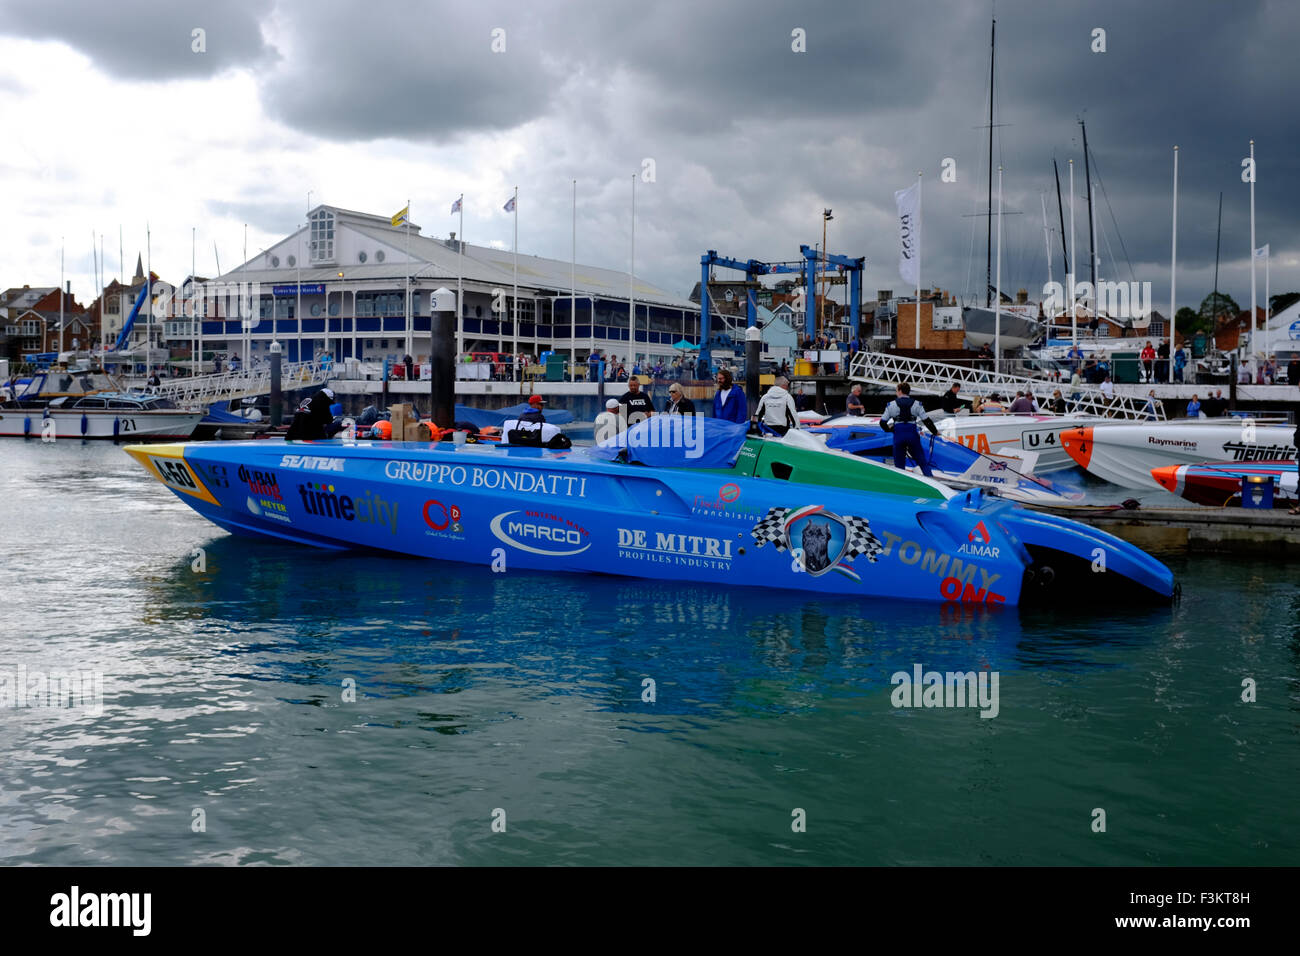 The Yacht Haven 2015, Cowes Classic, Power Boat Race, Cowes, Isle of Wight, England, UK, Stock Photo